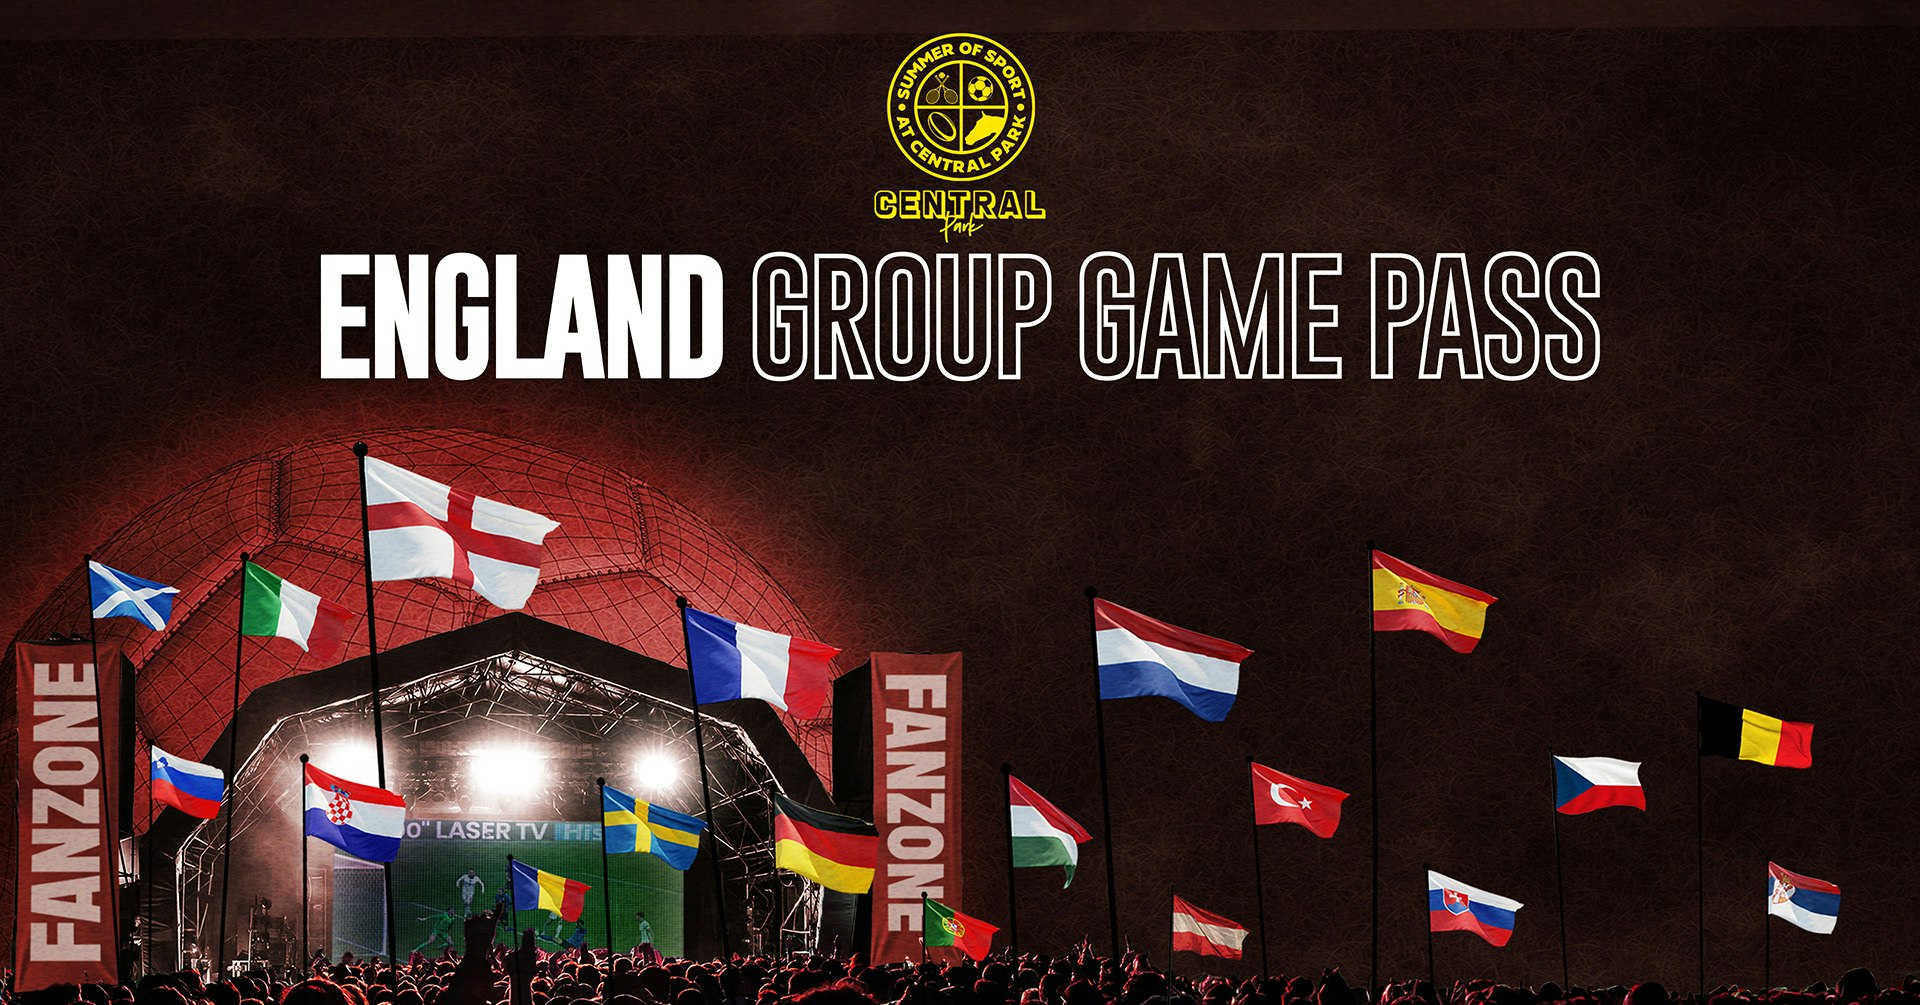 ENGLAND GROUP GAMES PASS! – CENTRAL PARK FANZONE SUNDERLAND